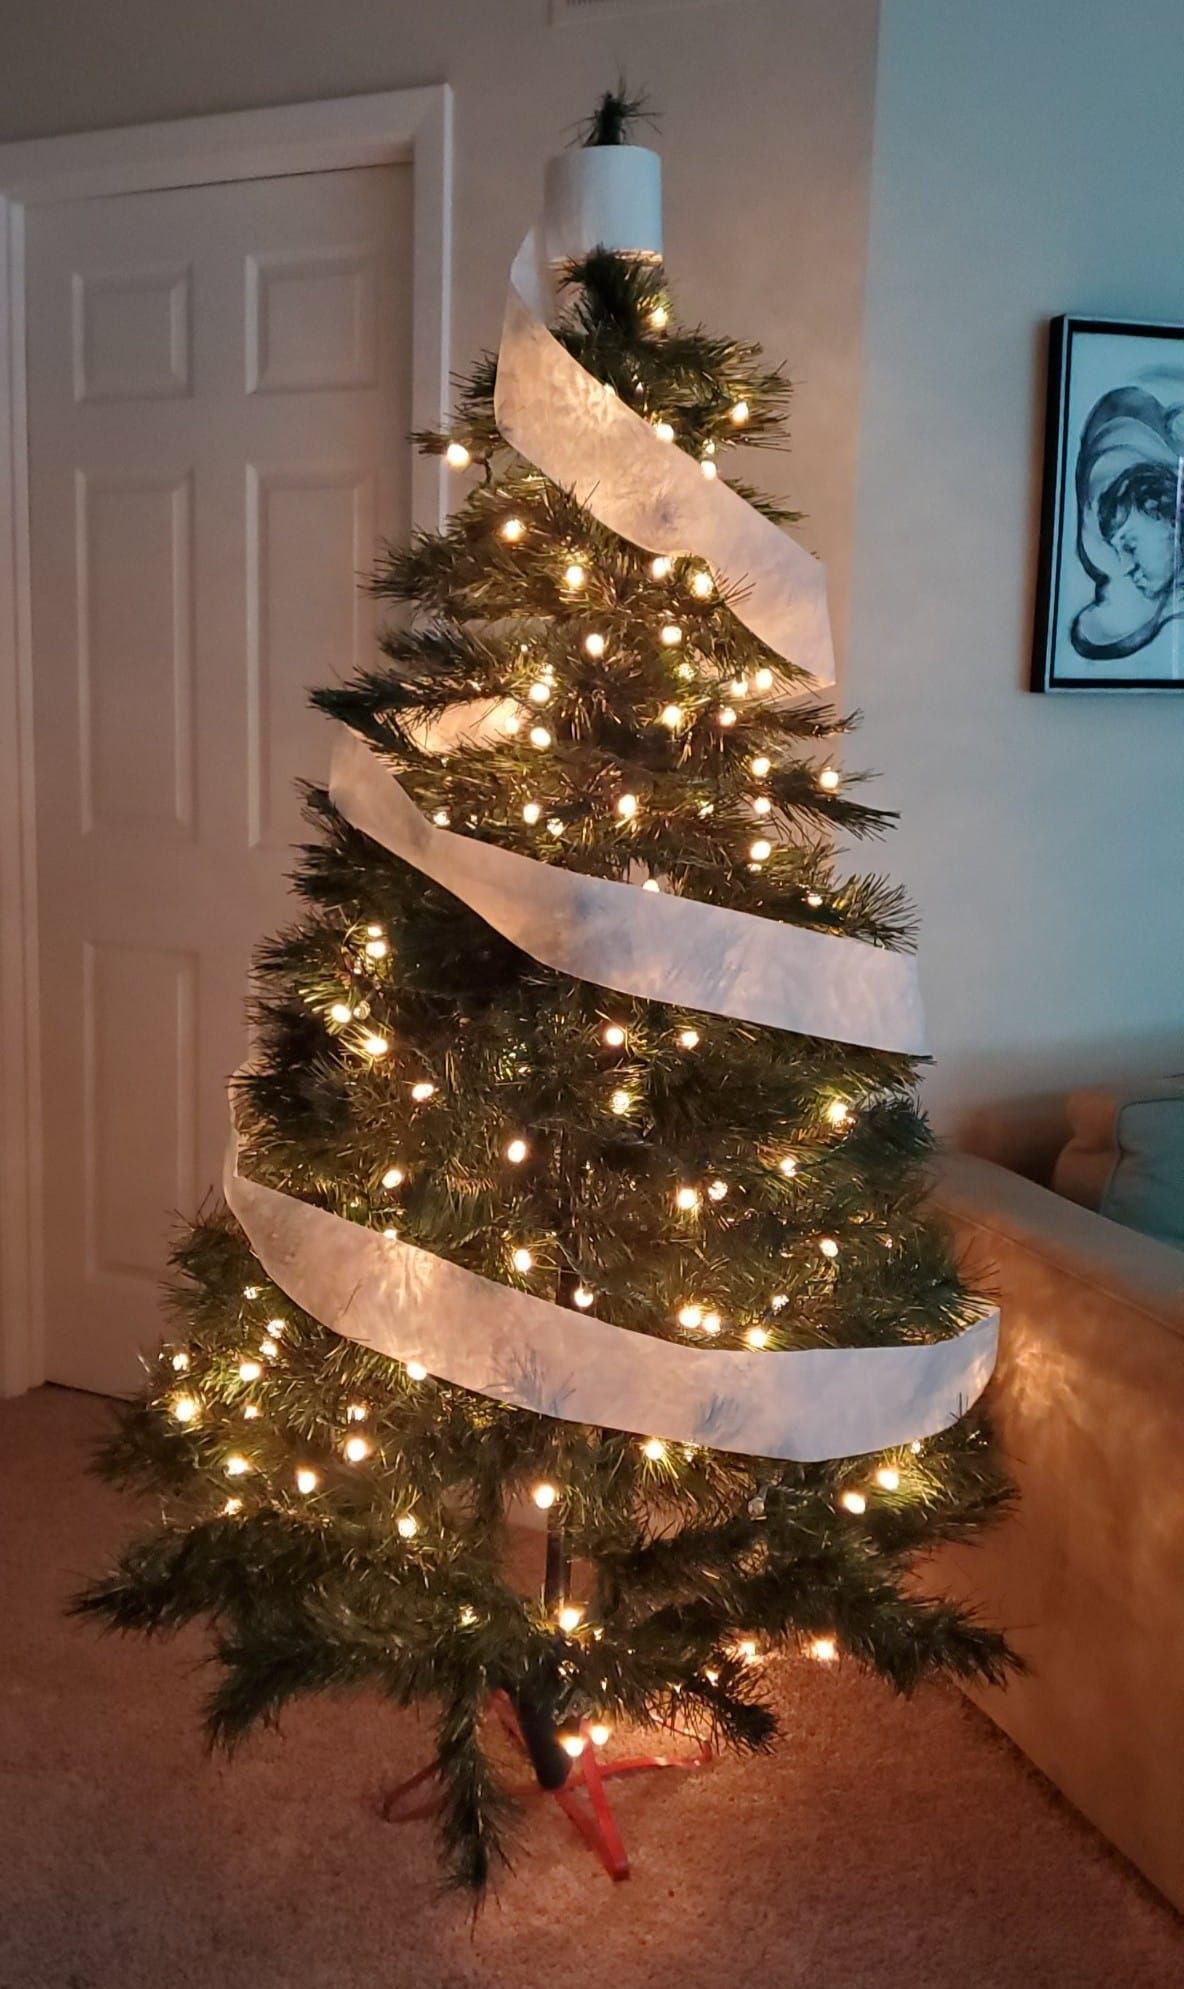 I don't have a star for my tree, so I've needed to get creative. I think this is fitting for 2020.